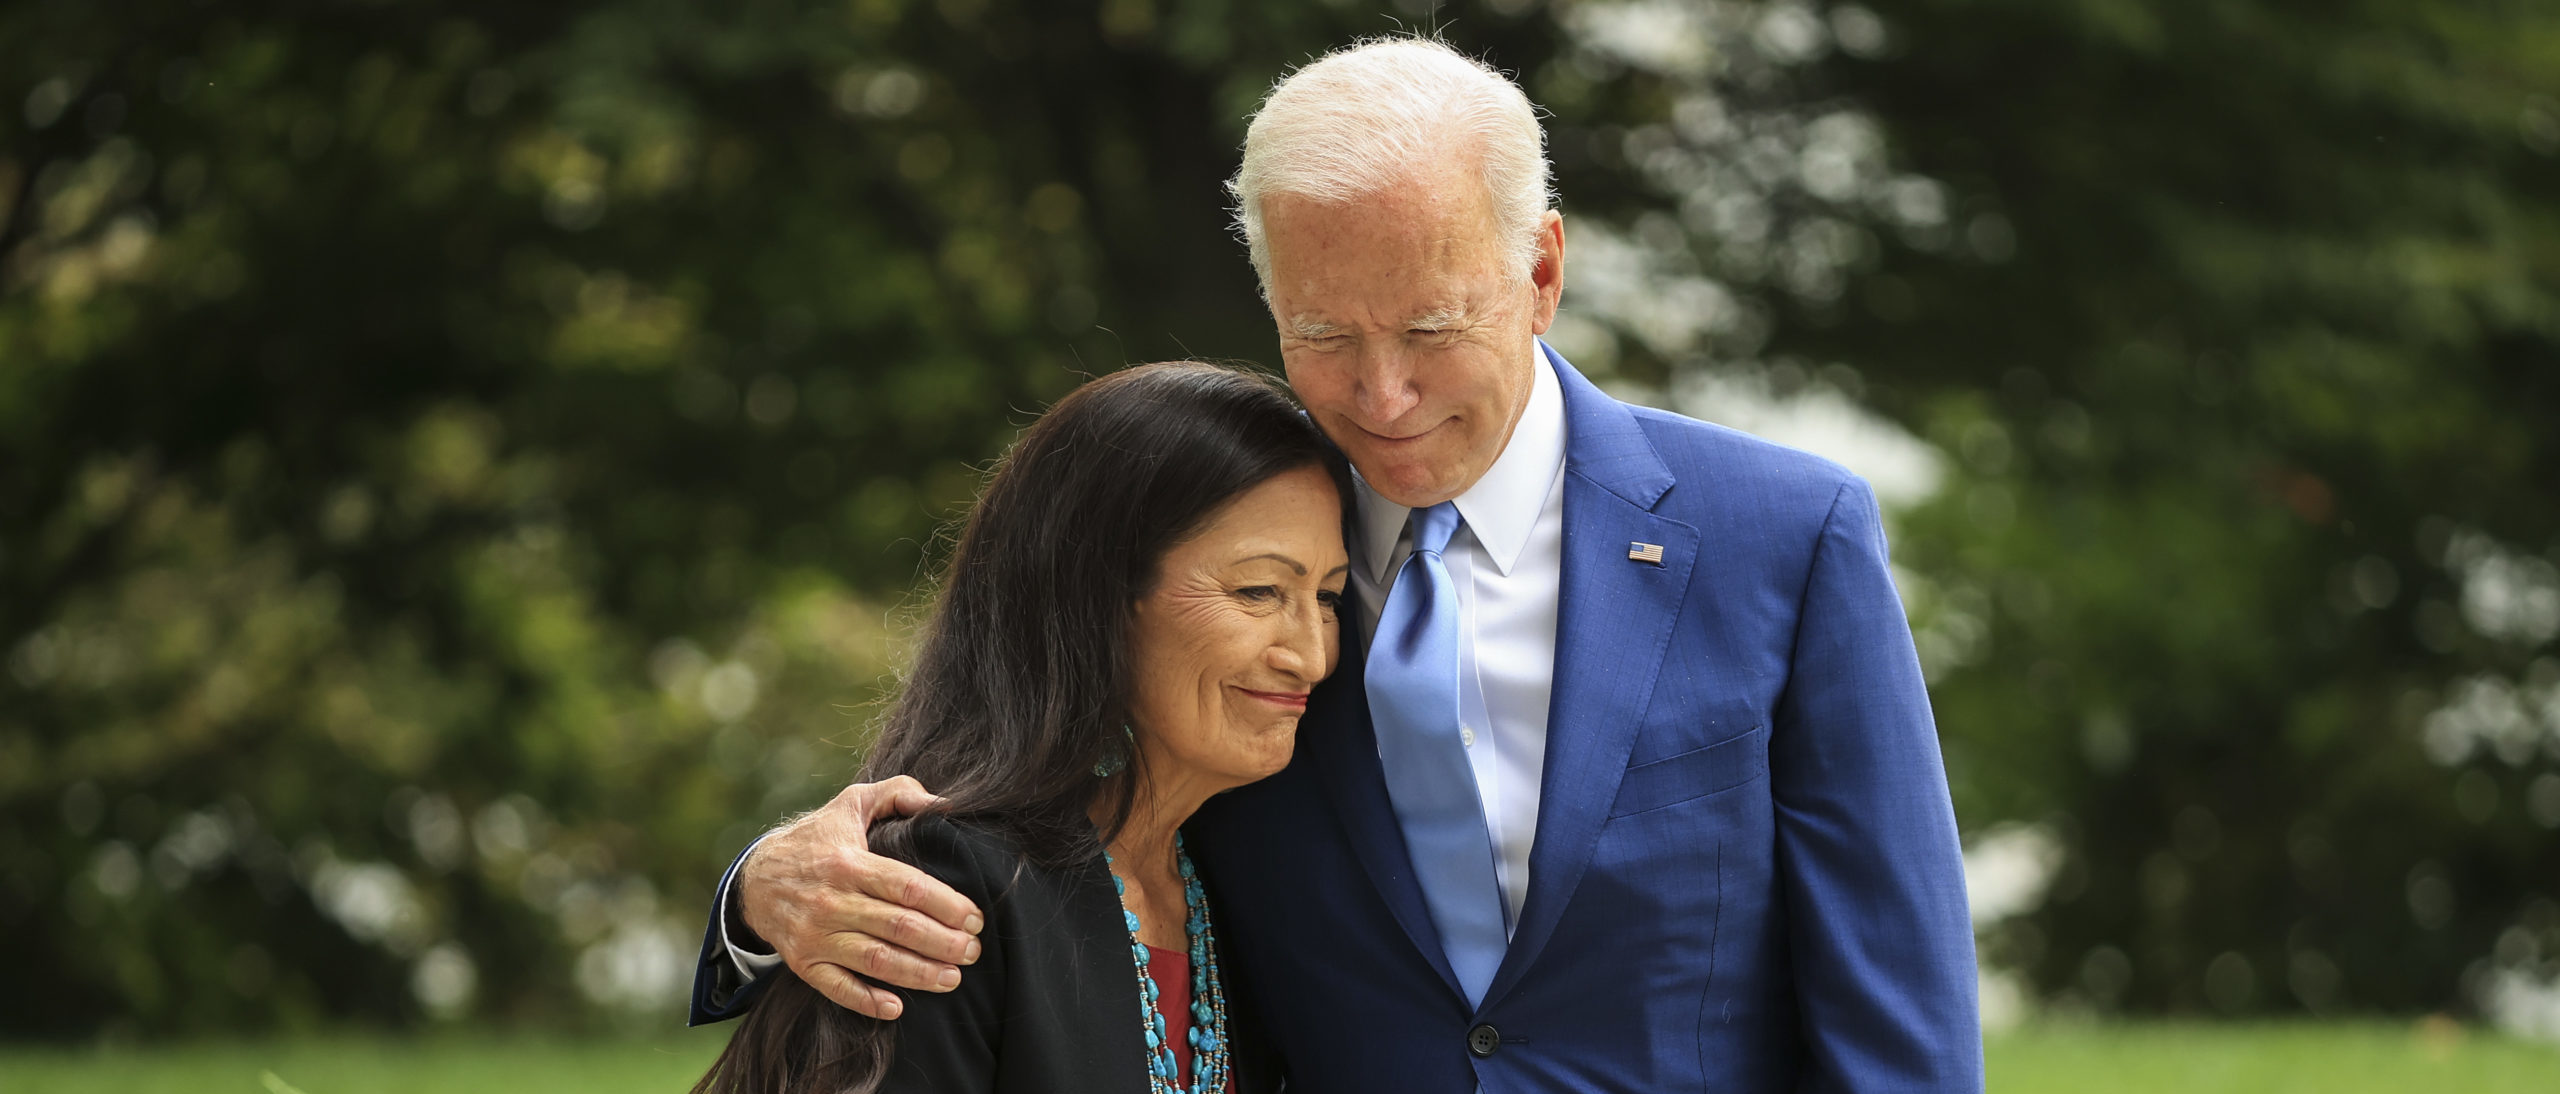 SUZANNE DOWNING: Deb Haaland Says The Quiet Part Out Loud — The Biden Admin Doesn’t Care About Creating Jobs